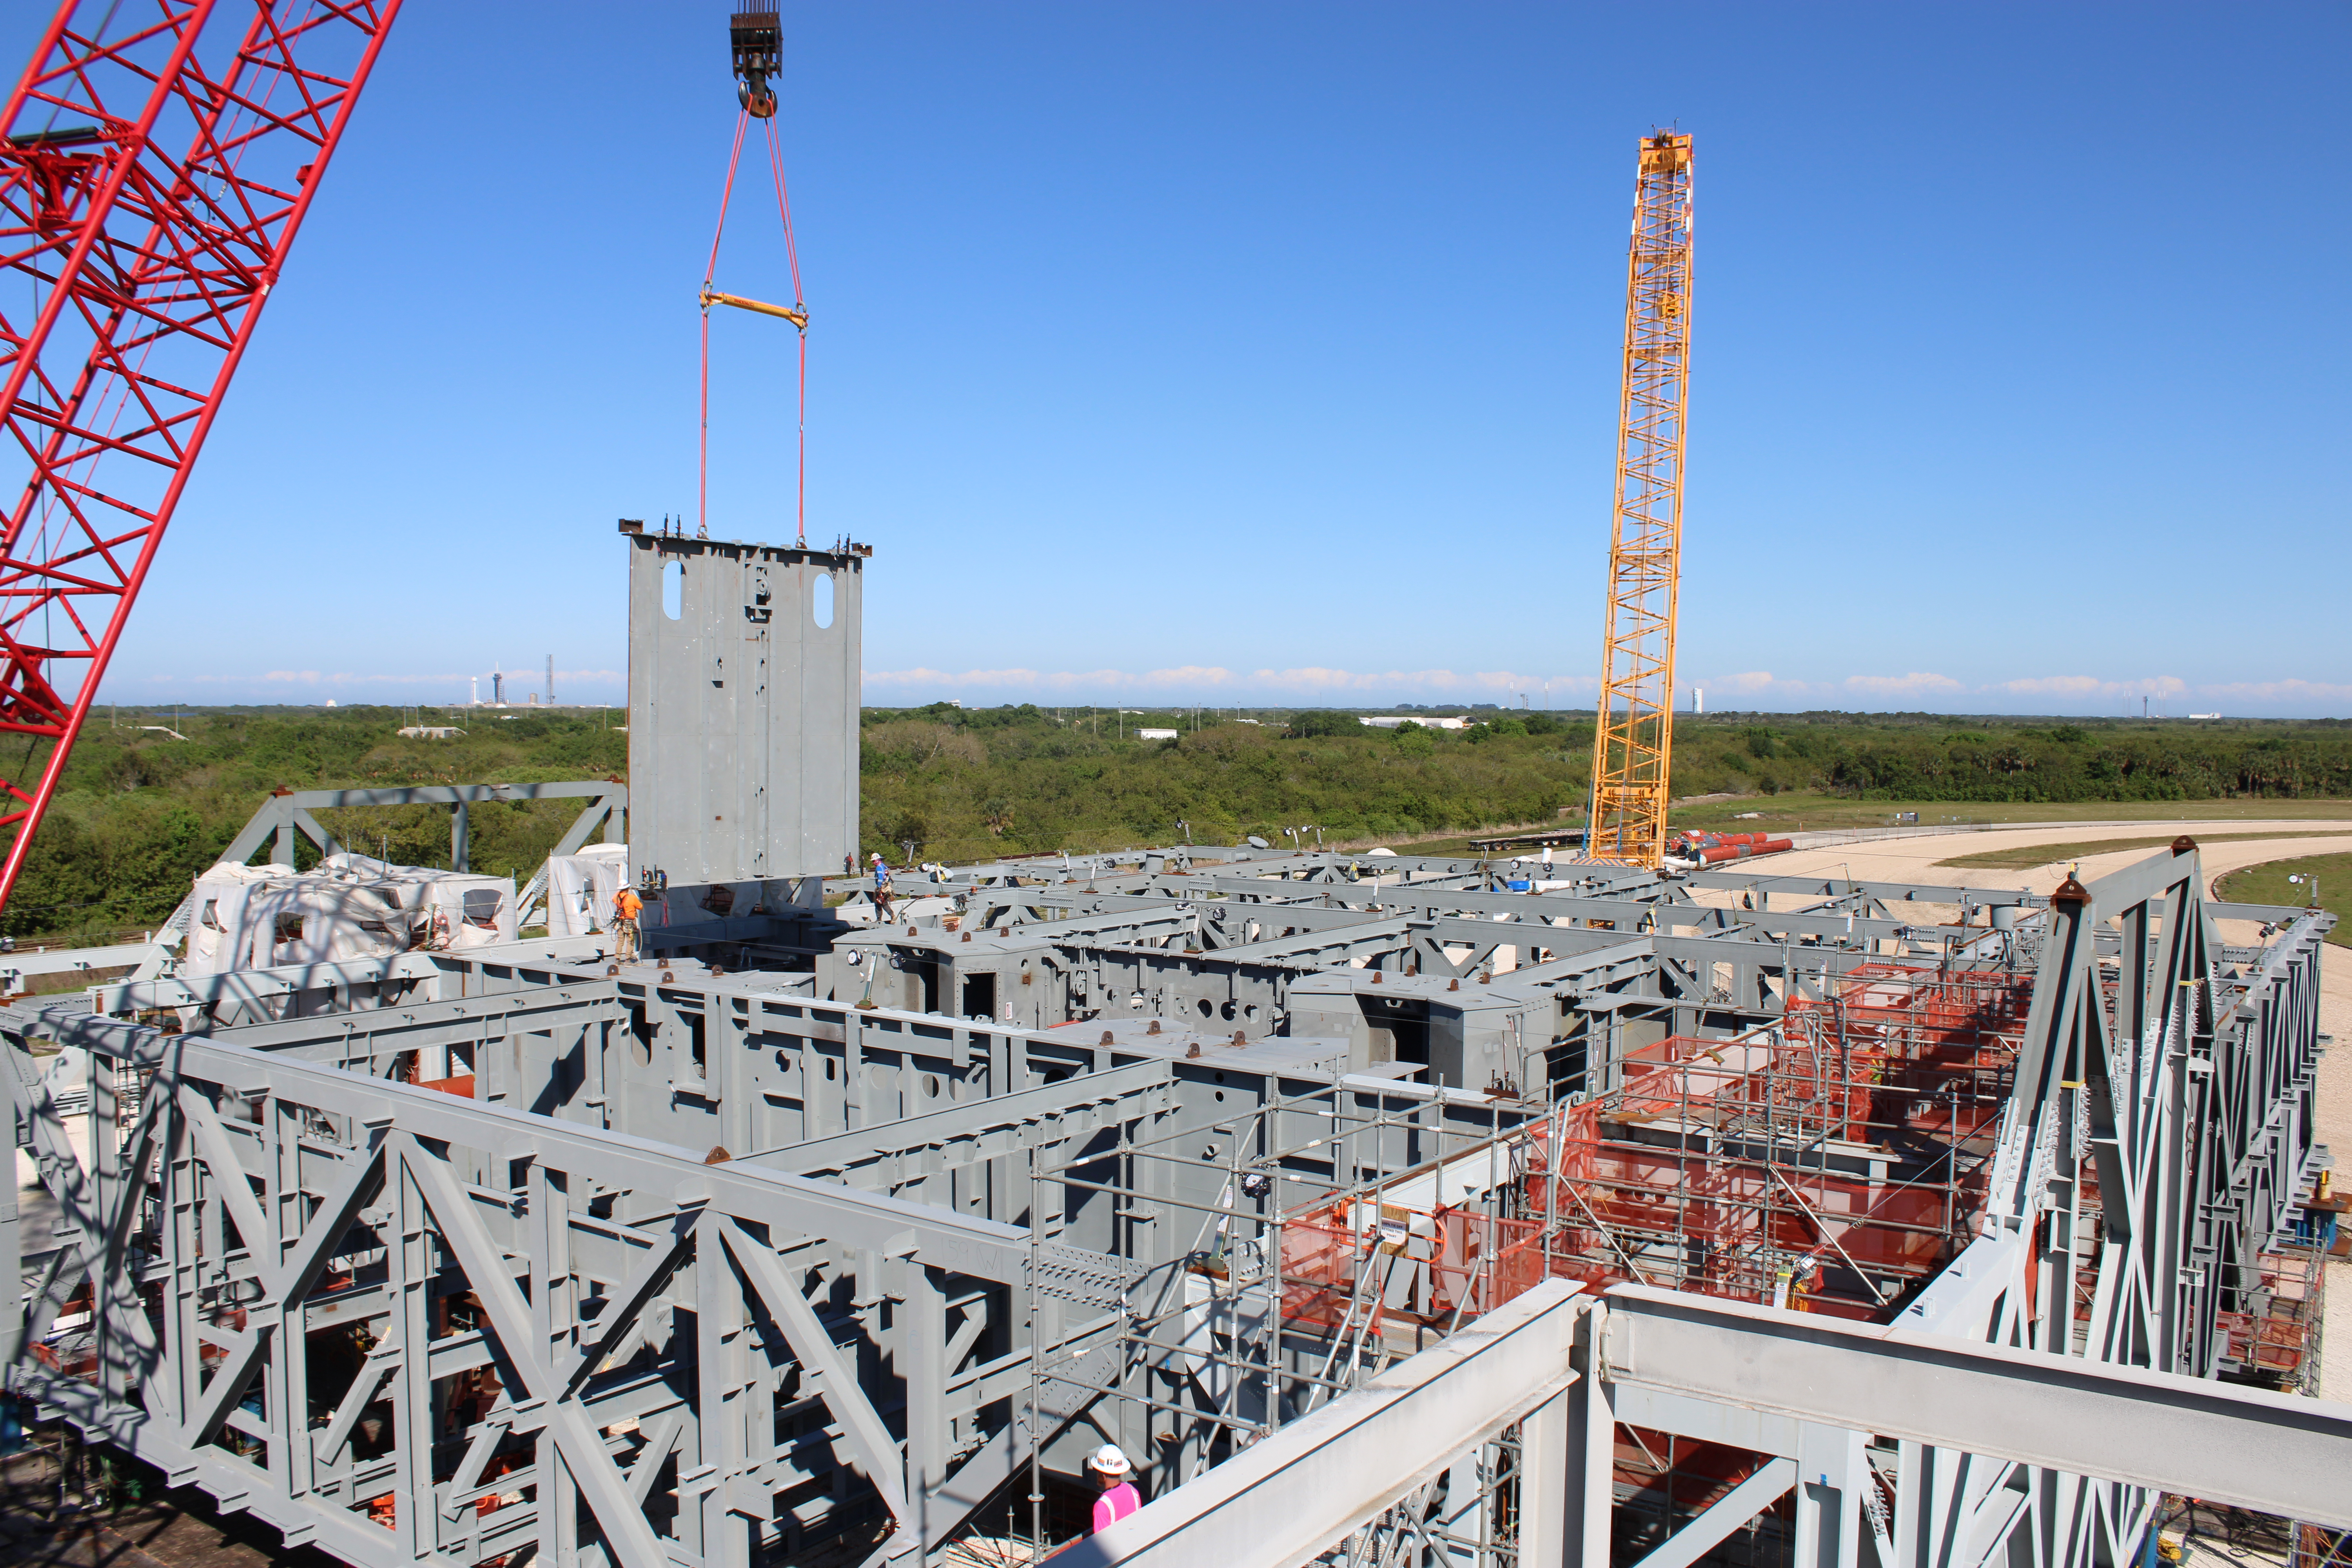 The lift of a steel girder in progress on the mobile launcher 2 base at Kennedy Space Center.